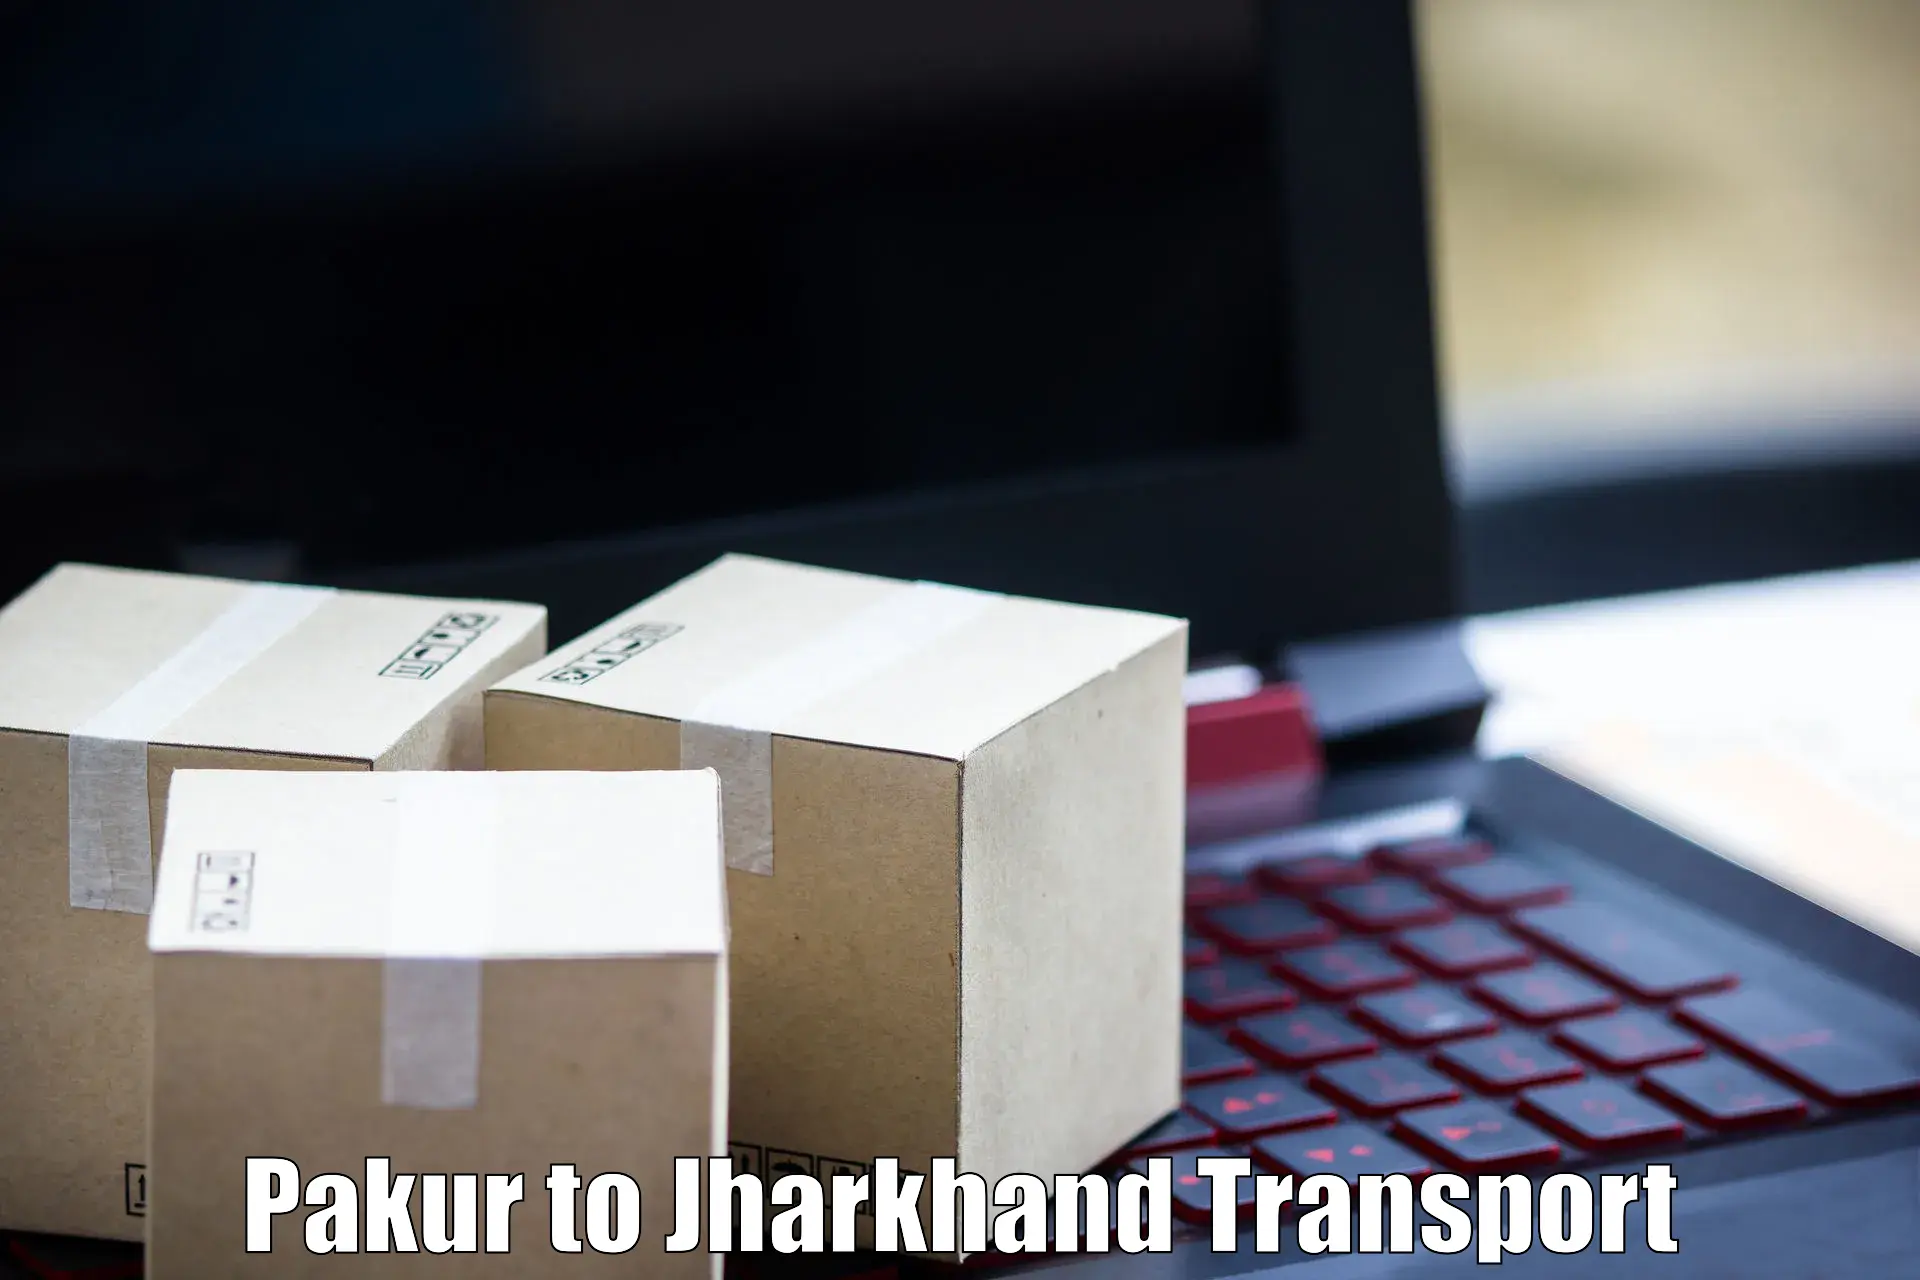 Delivery service Pakur to Padma Hazaribagh